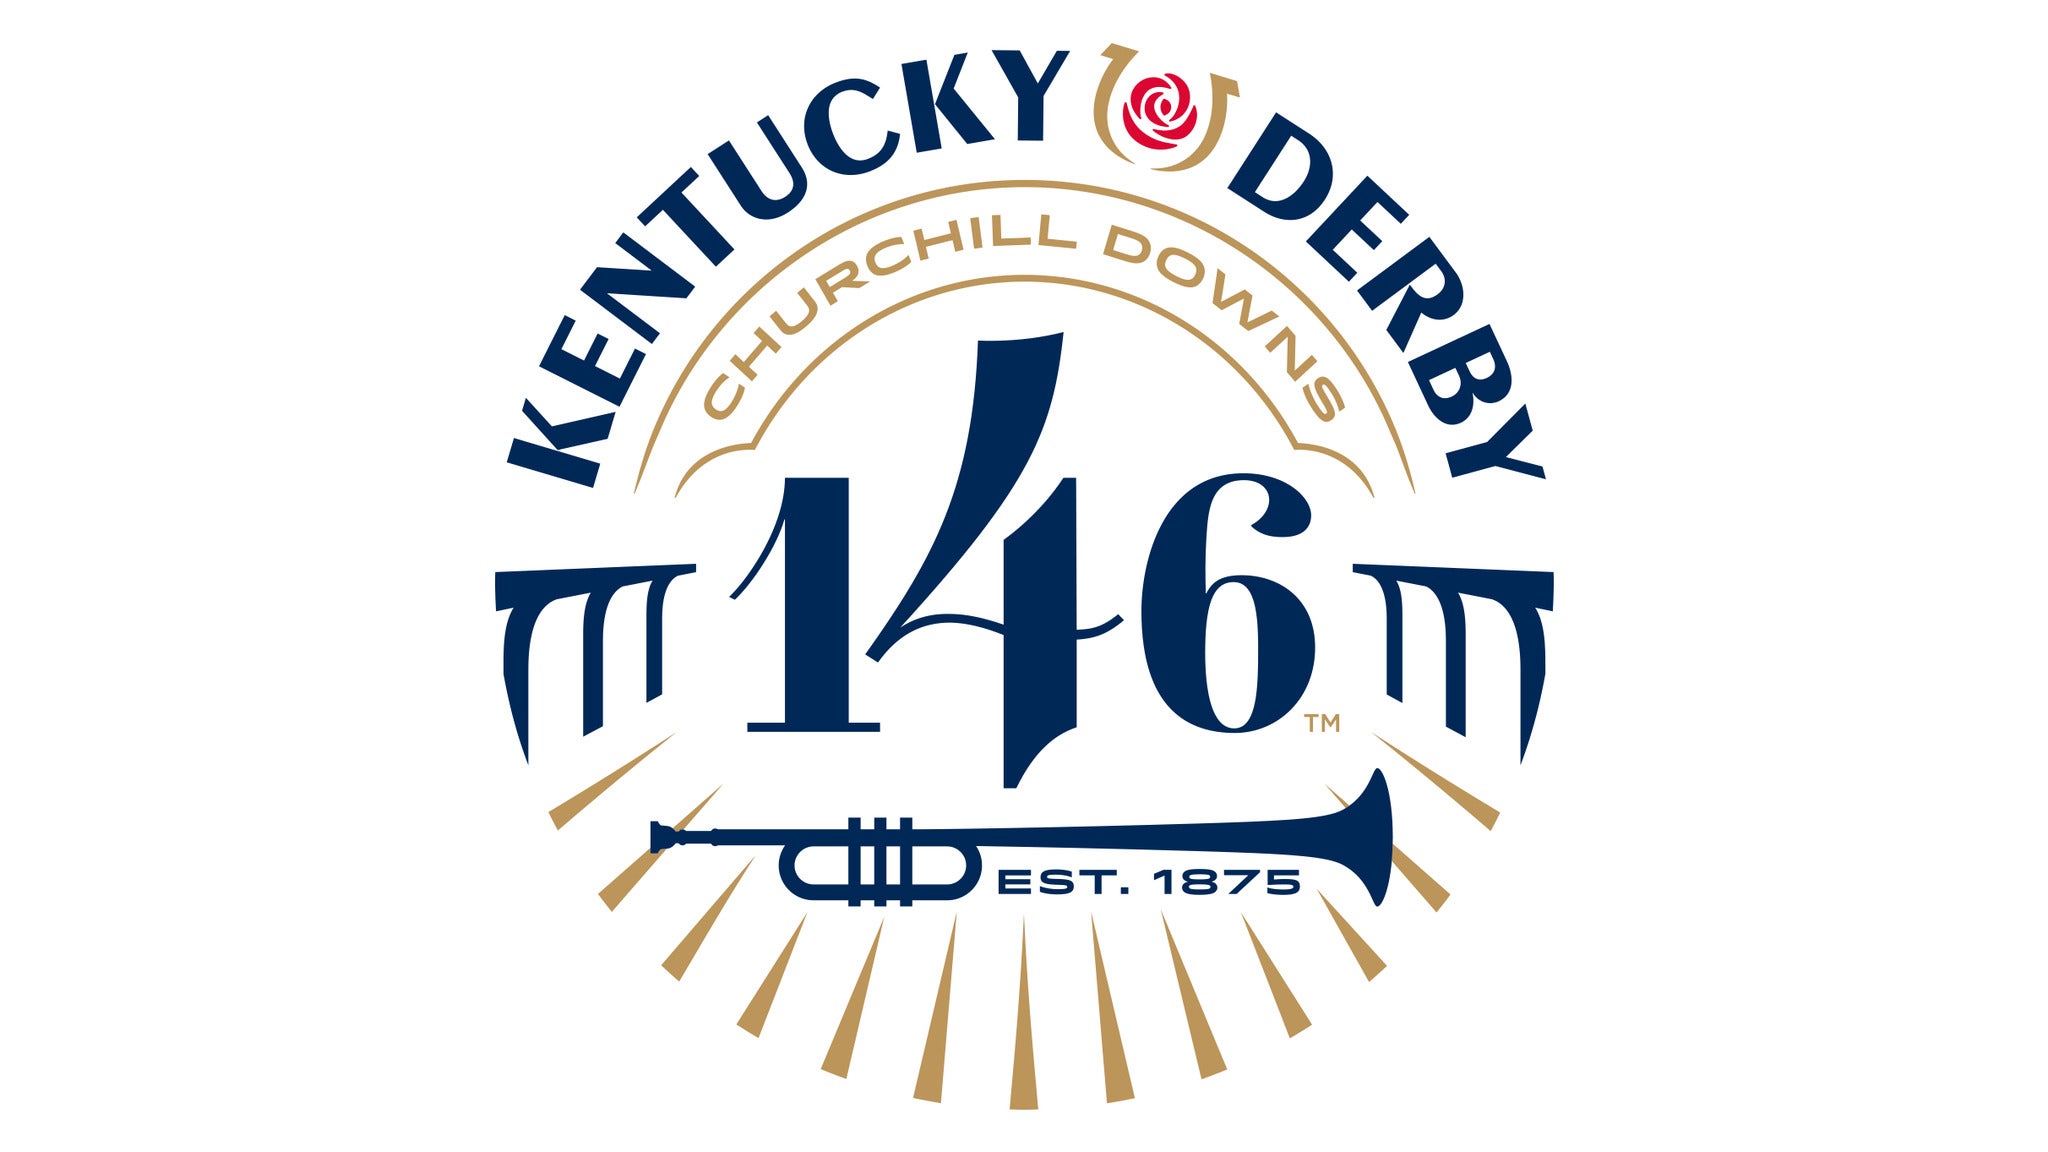 146th Kentucky Derby - Infield & Paddock General Admission Single Day in Louisville promo photo for Standard Purchase Pricing presale offer code